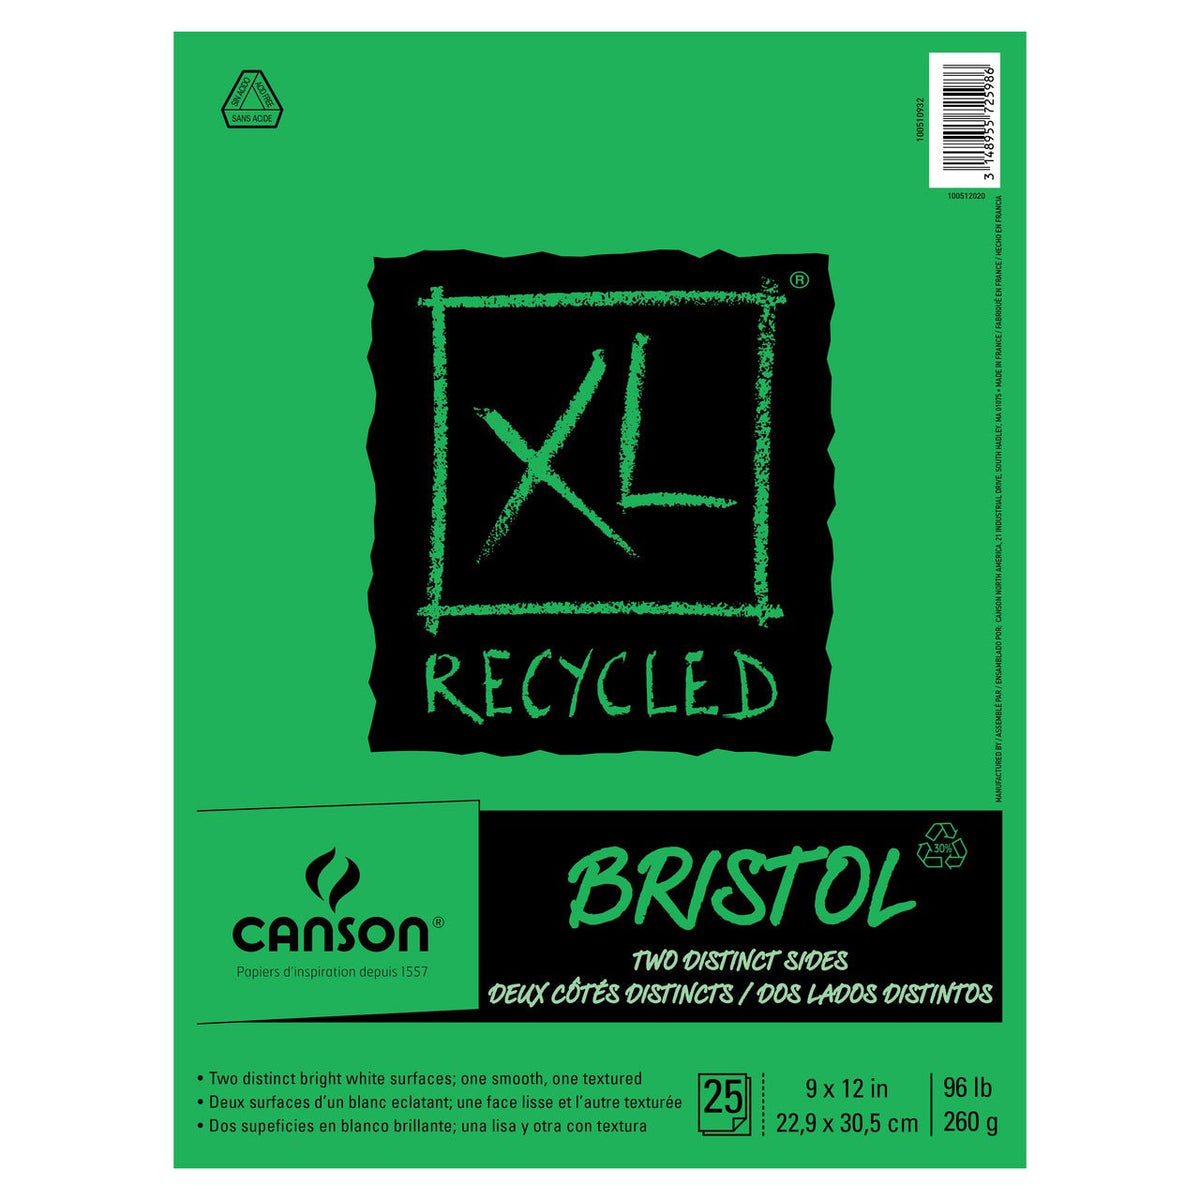 Canson XL Recycled Bristol - 25 Sheet Pad - 9x12 inch - merriartist.com